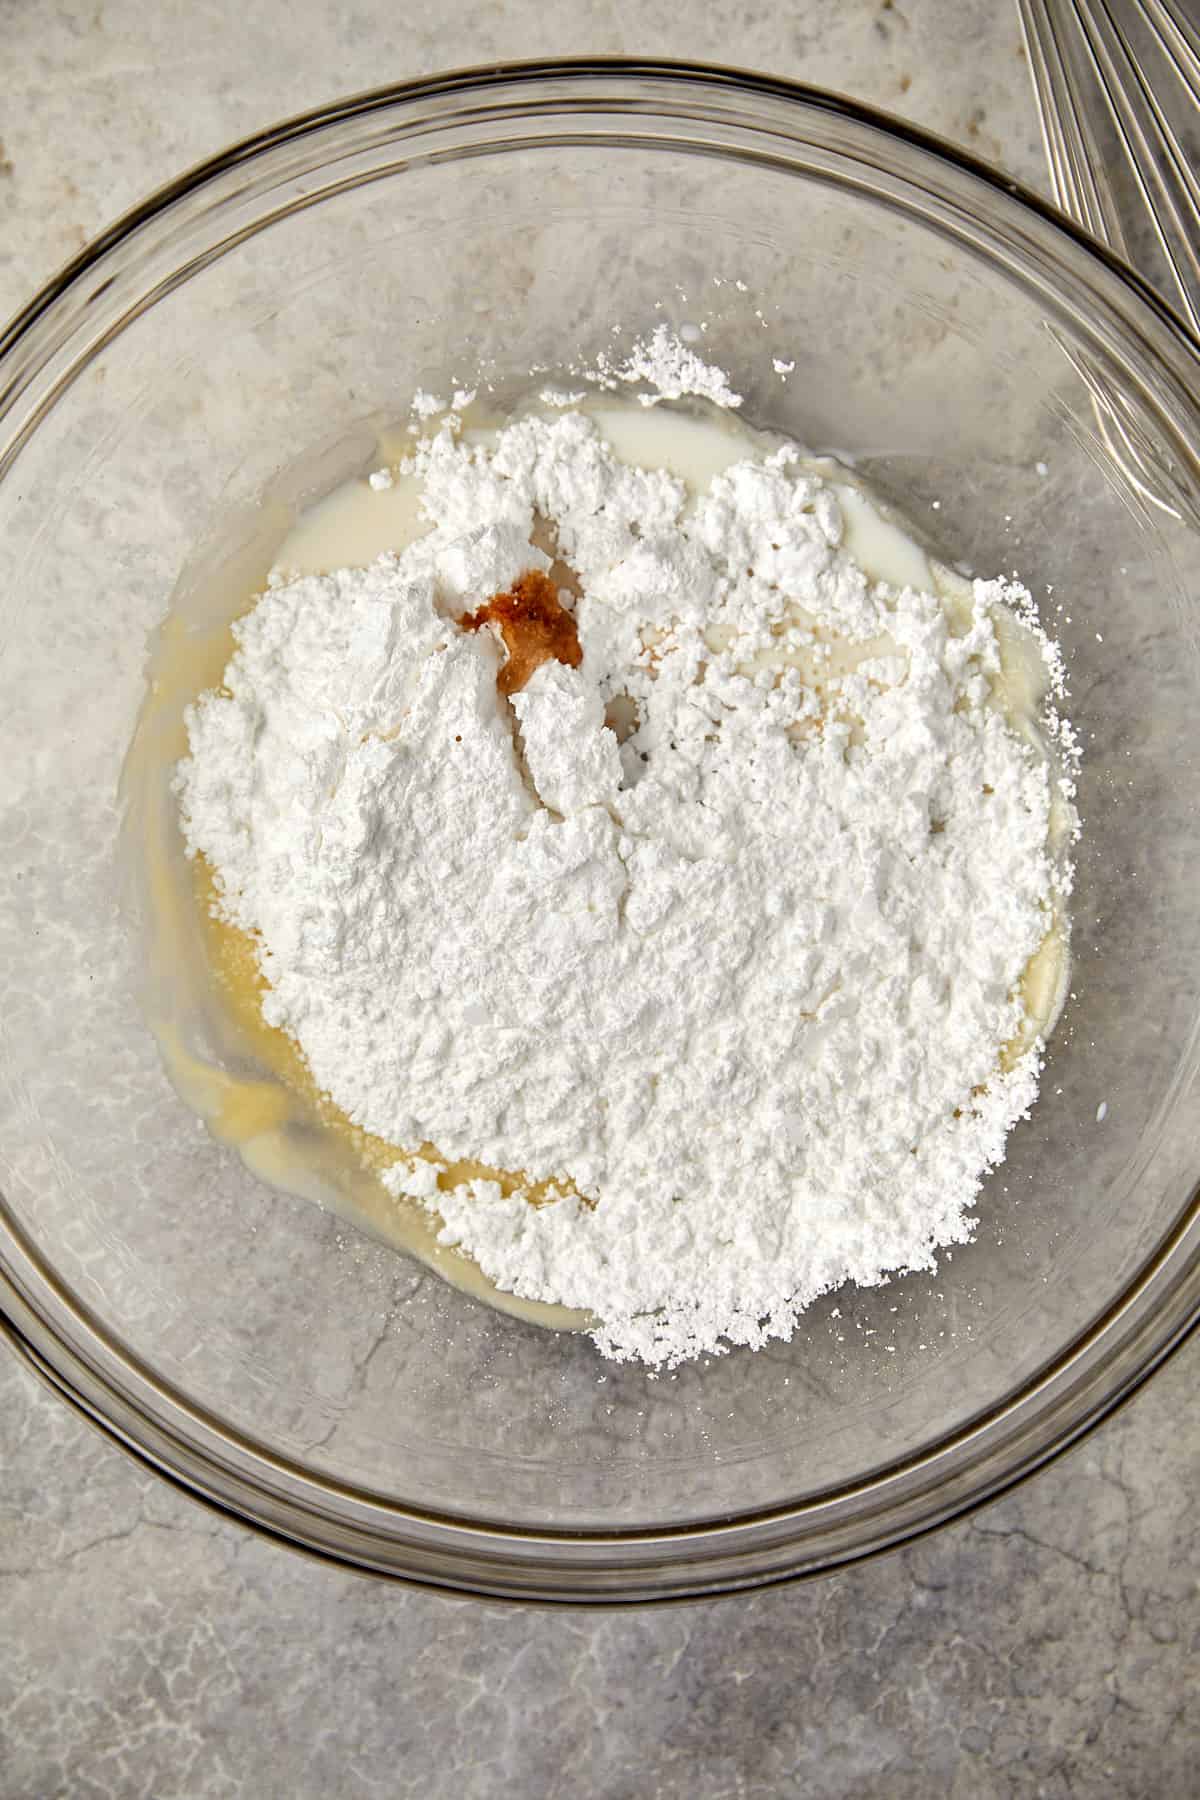 The image shows a clear glass mixing bowl on a gray surface. Inside the bowl, you can see a mound of powdered sugar on top of melted chocolate. Vanilla is also in the mound of powdered sugar. 